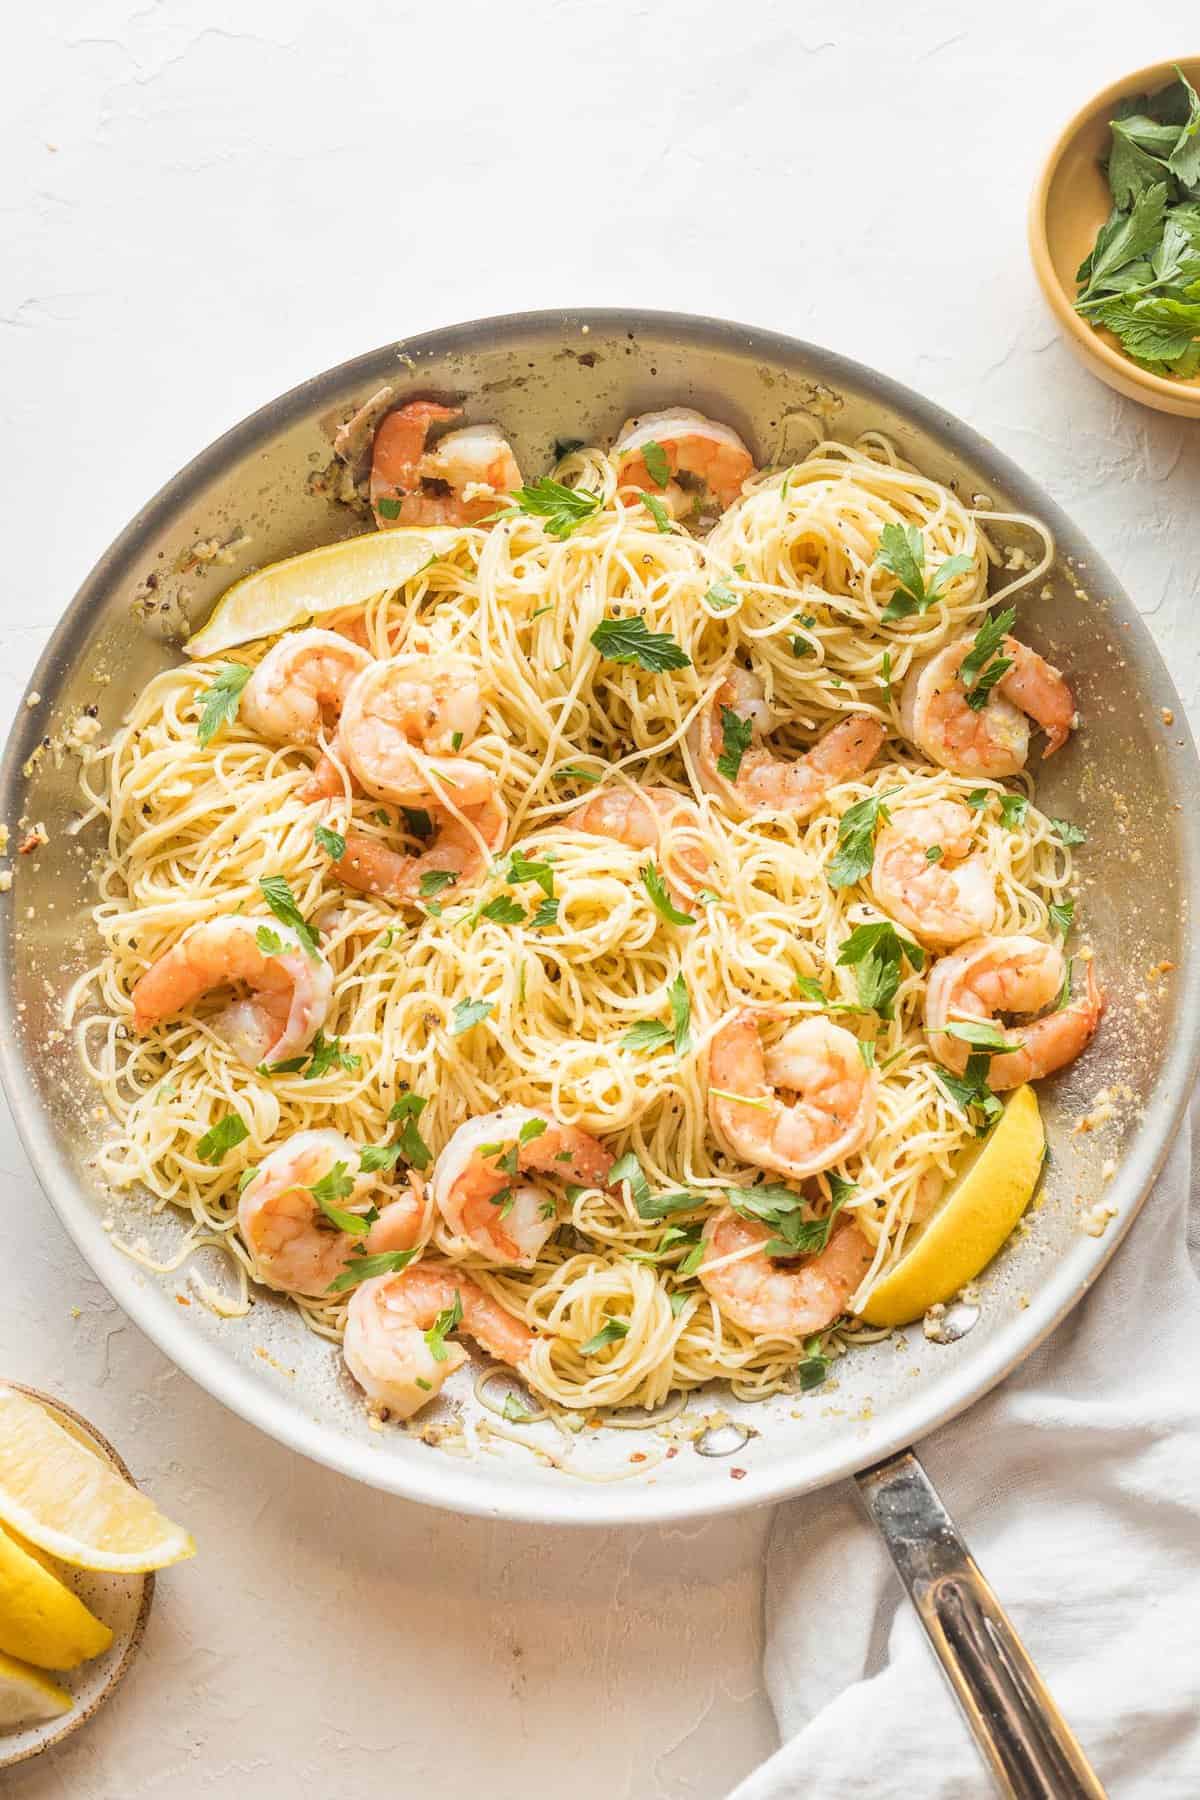 An easy shrimp scampi pasta in a white bowl ready to serve